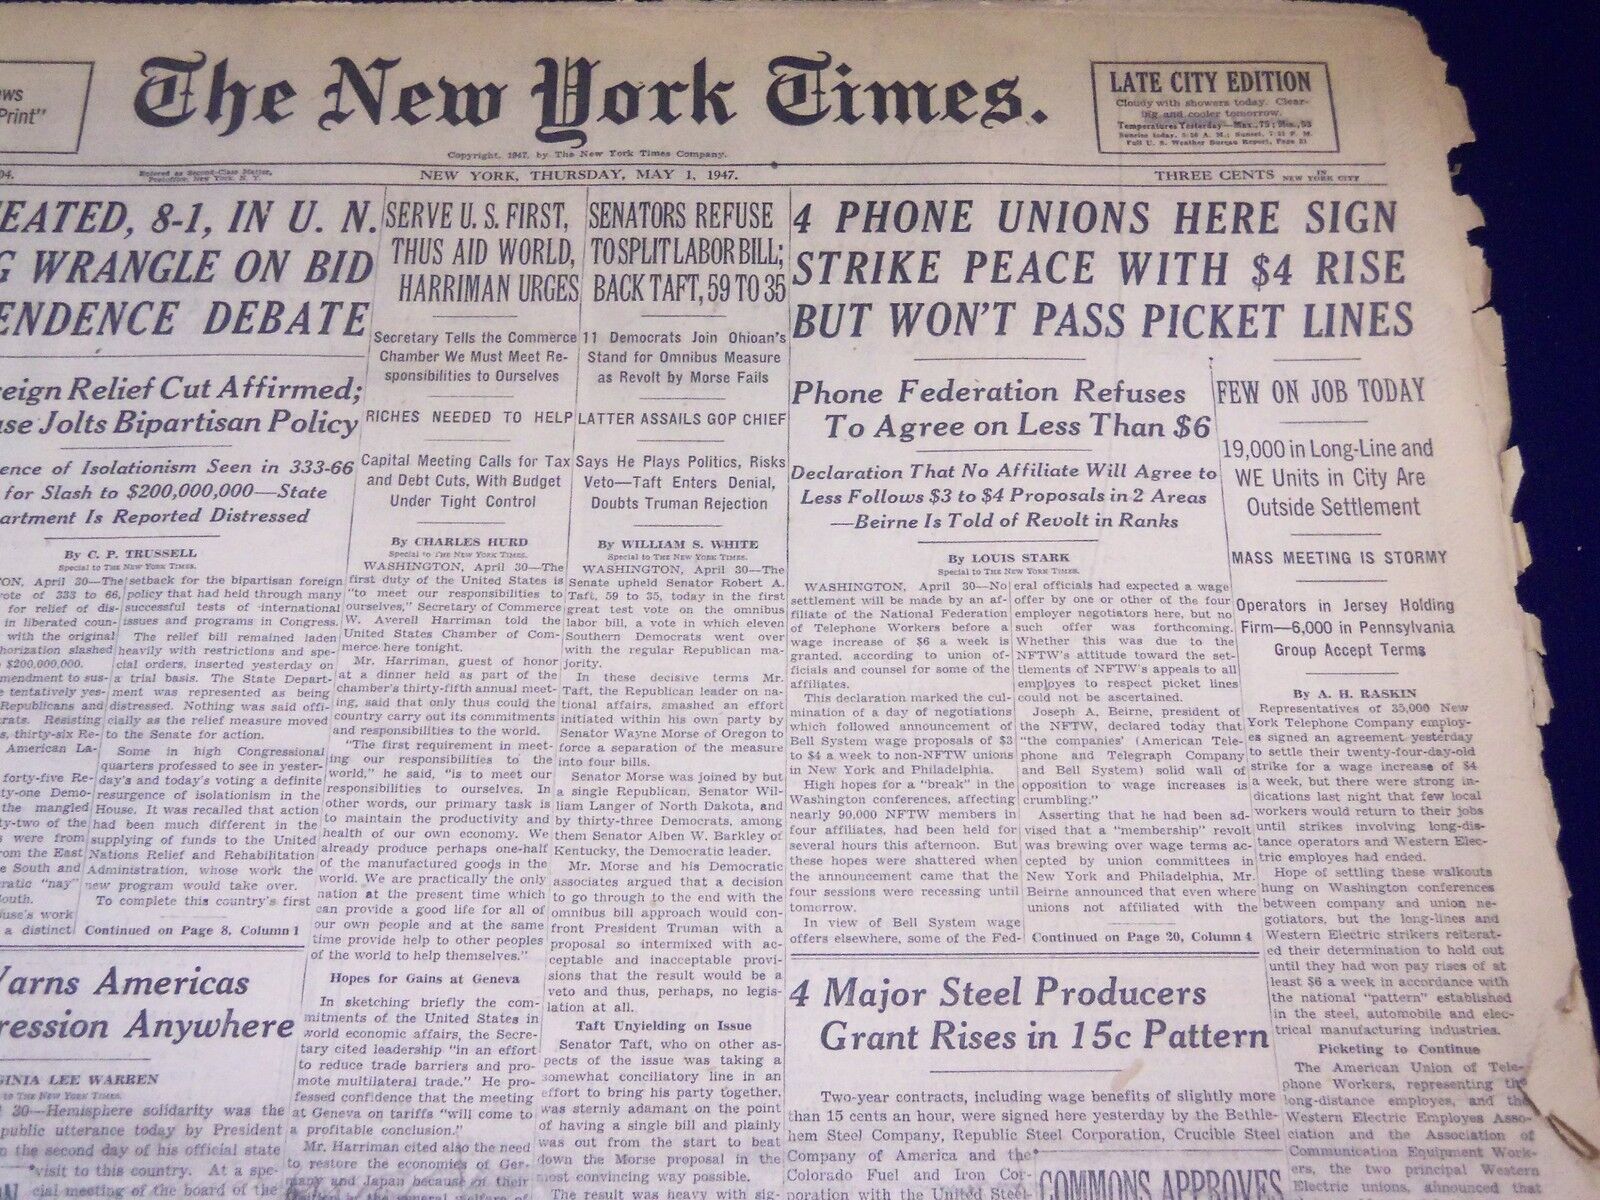 1947 MAY 1 NEW YORK TIMES - PHONE UNIONS SIGN STRIKE PEACE - NT 2749